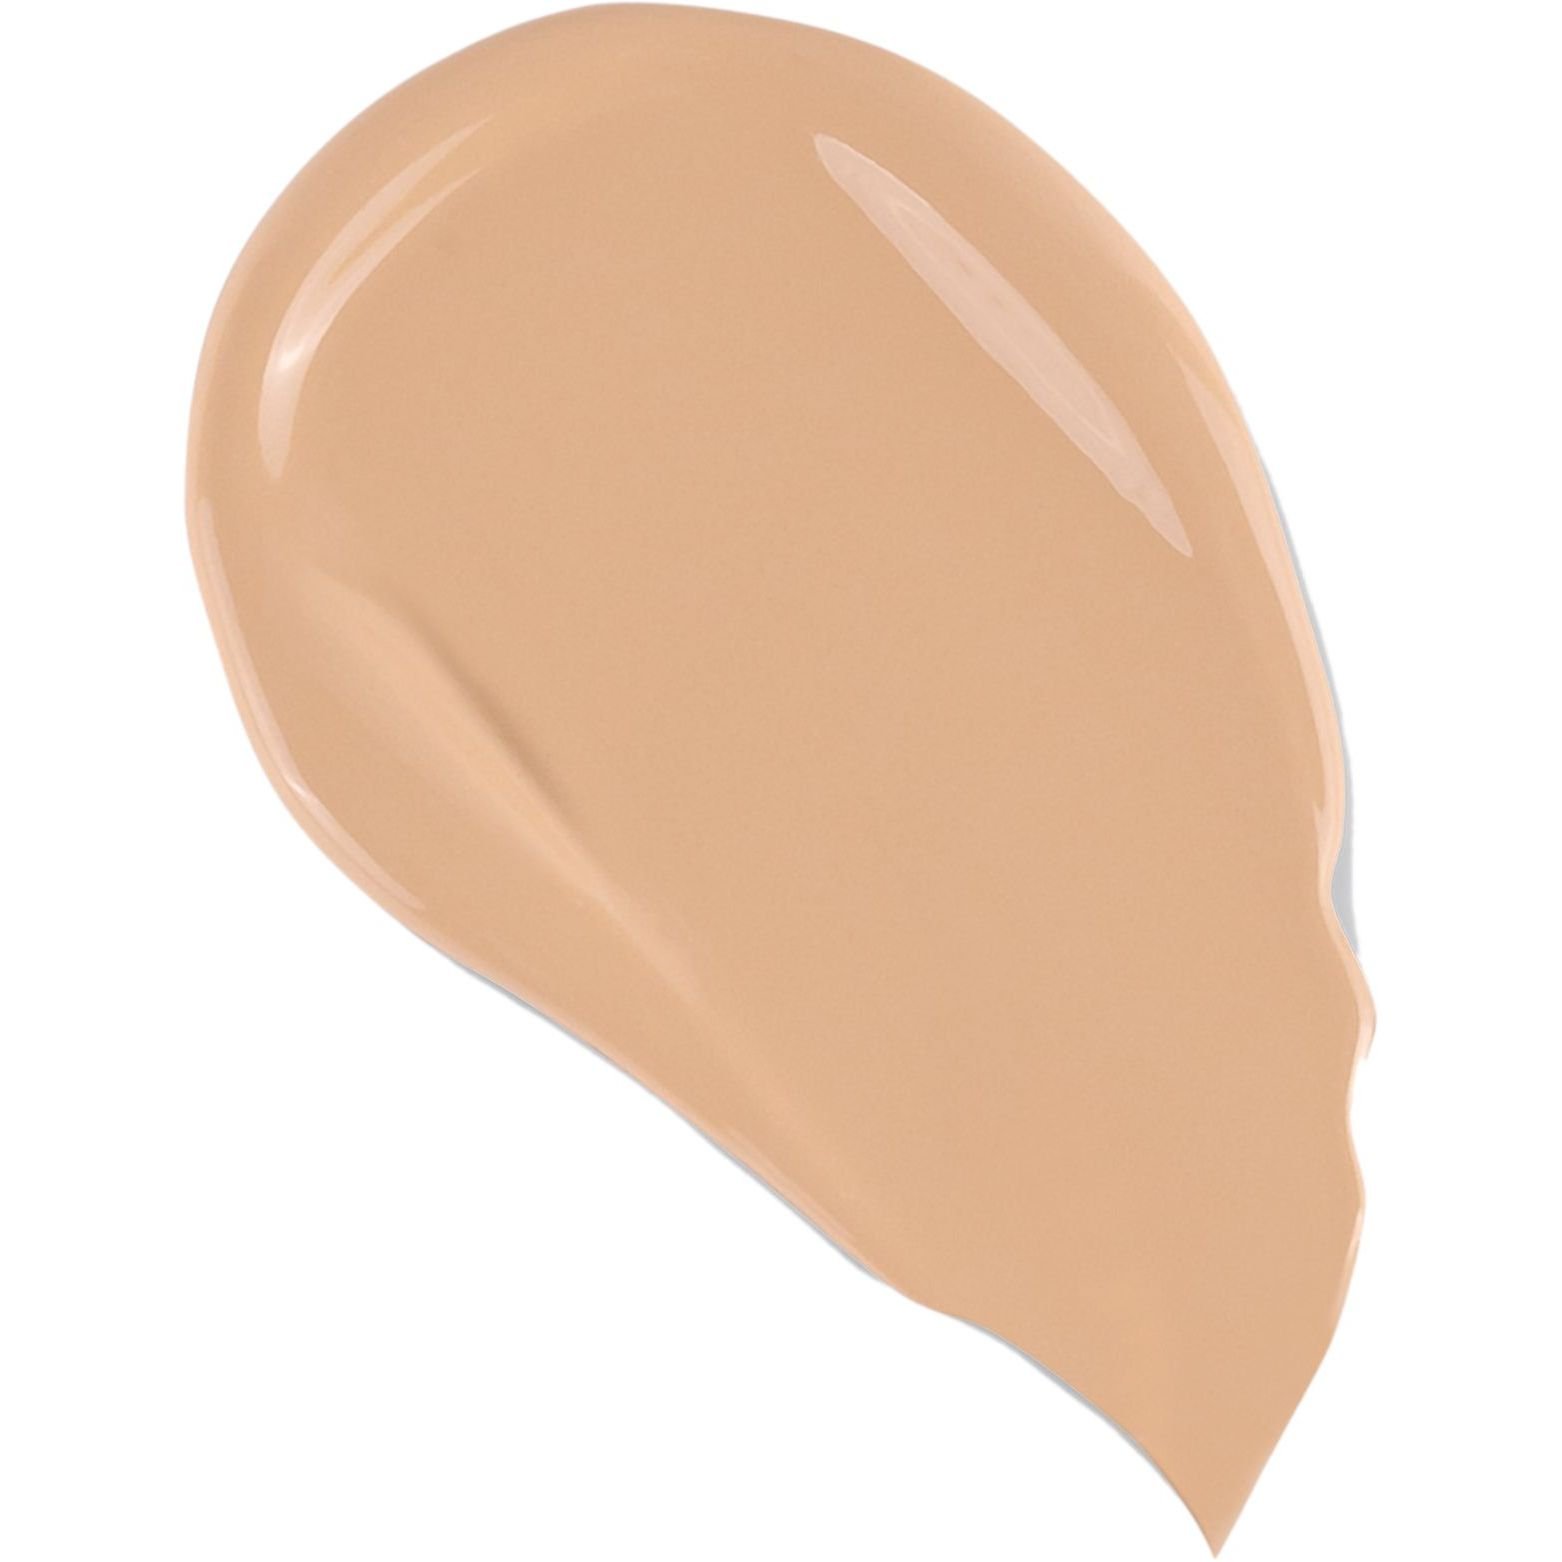 Тональная основа Note Cosmetique Invisible Perfection Foundation тон 130 (Nude Bisque) 35 мл - фото 3